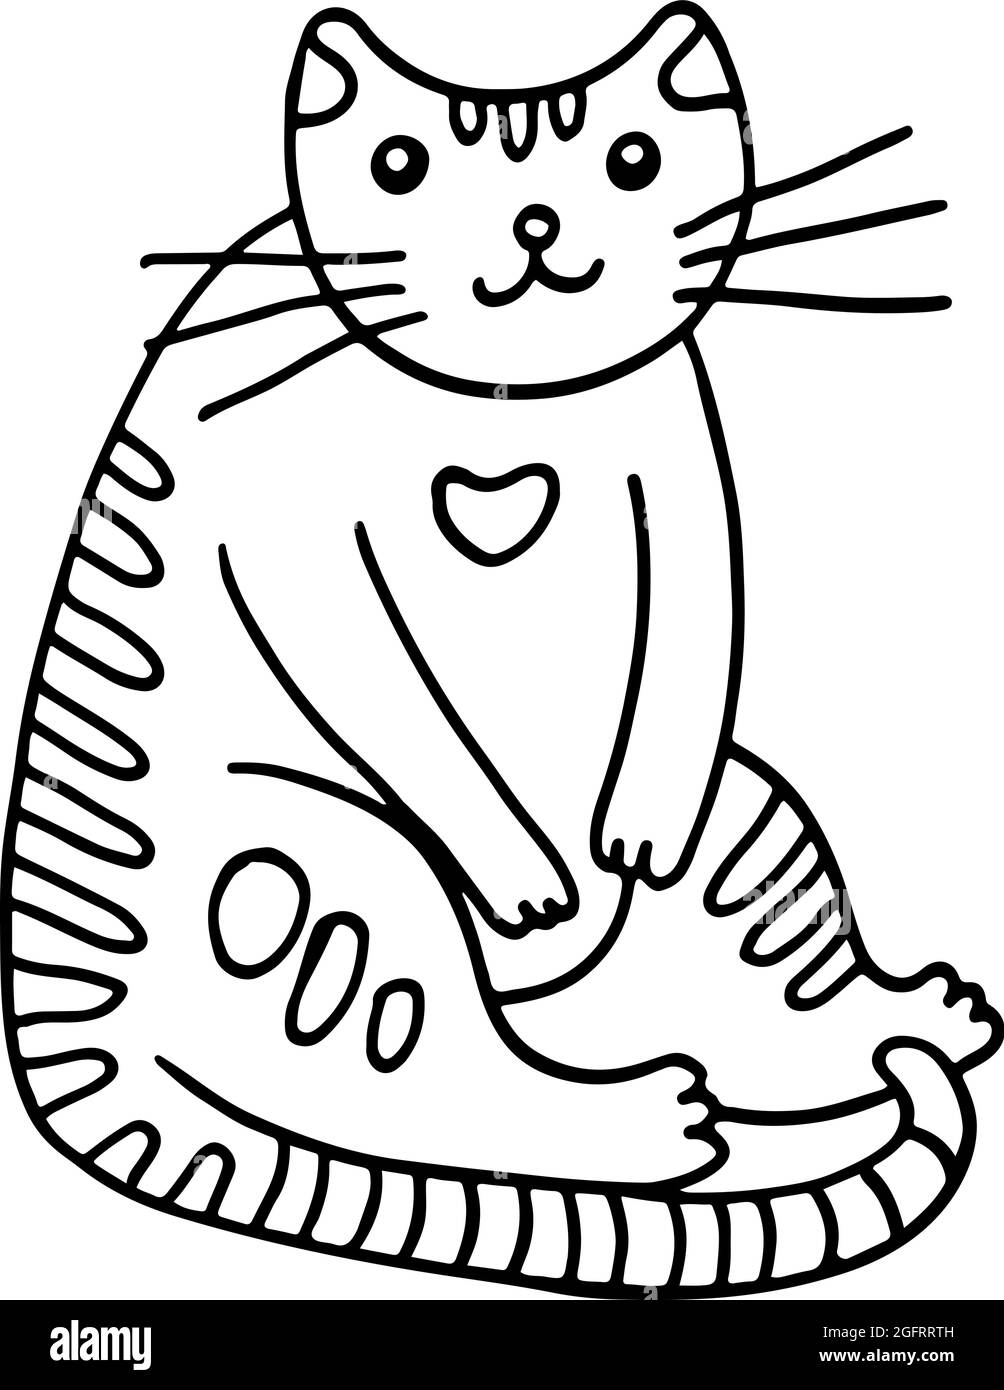 Cute fat cat for greeting cards Royalty Free Vector Image